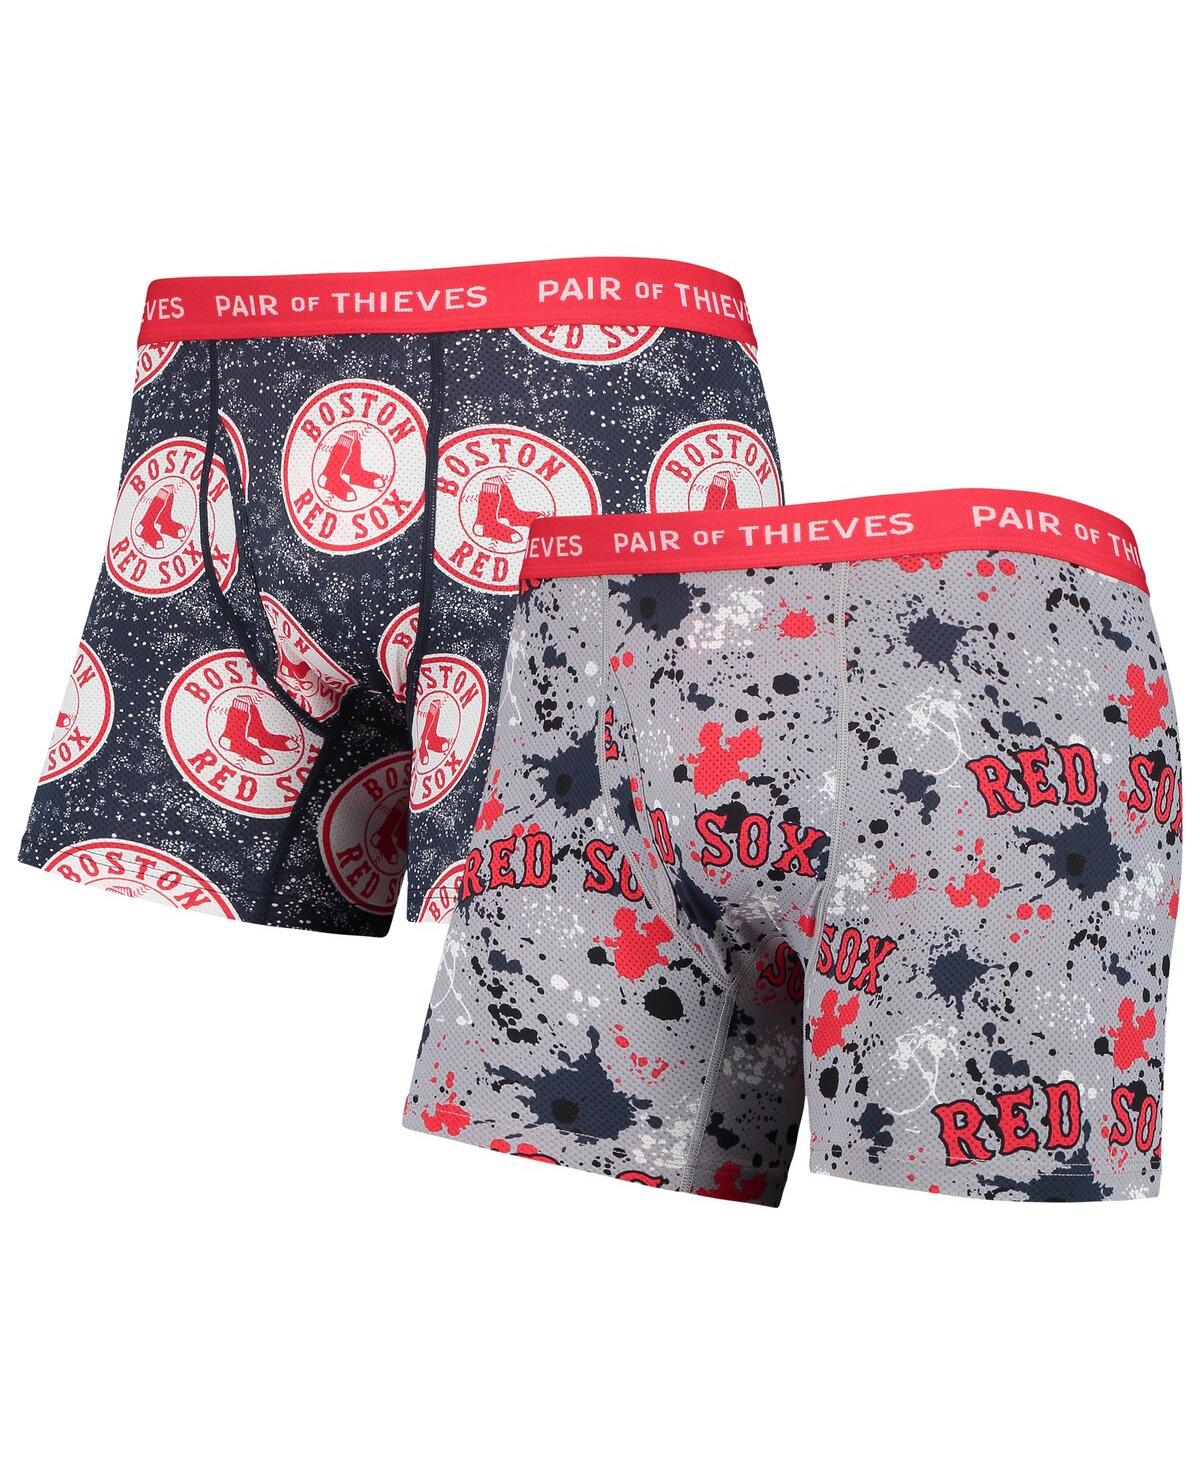 Men's Pair of Thieves Gray, Navy Boston Red Sox Super Fit 2-Pack Boxer Briefs Set - Gray, Navy